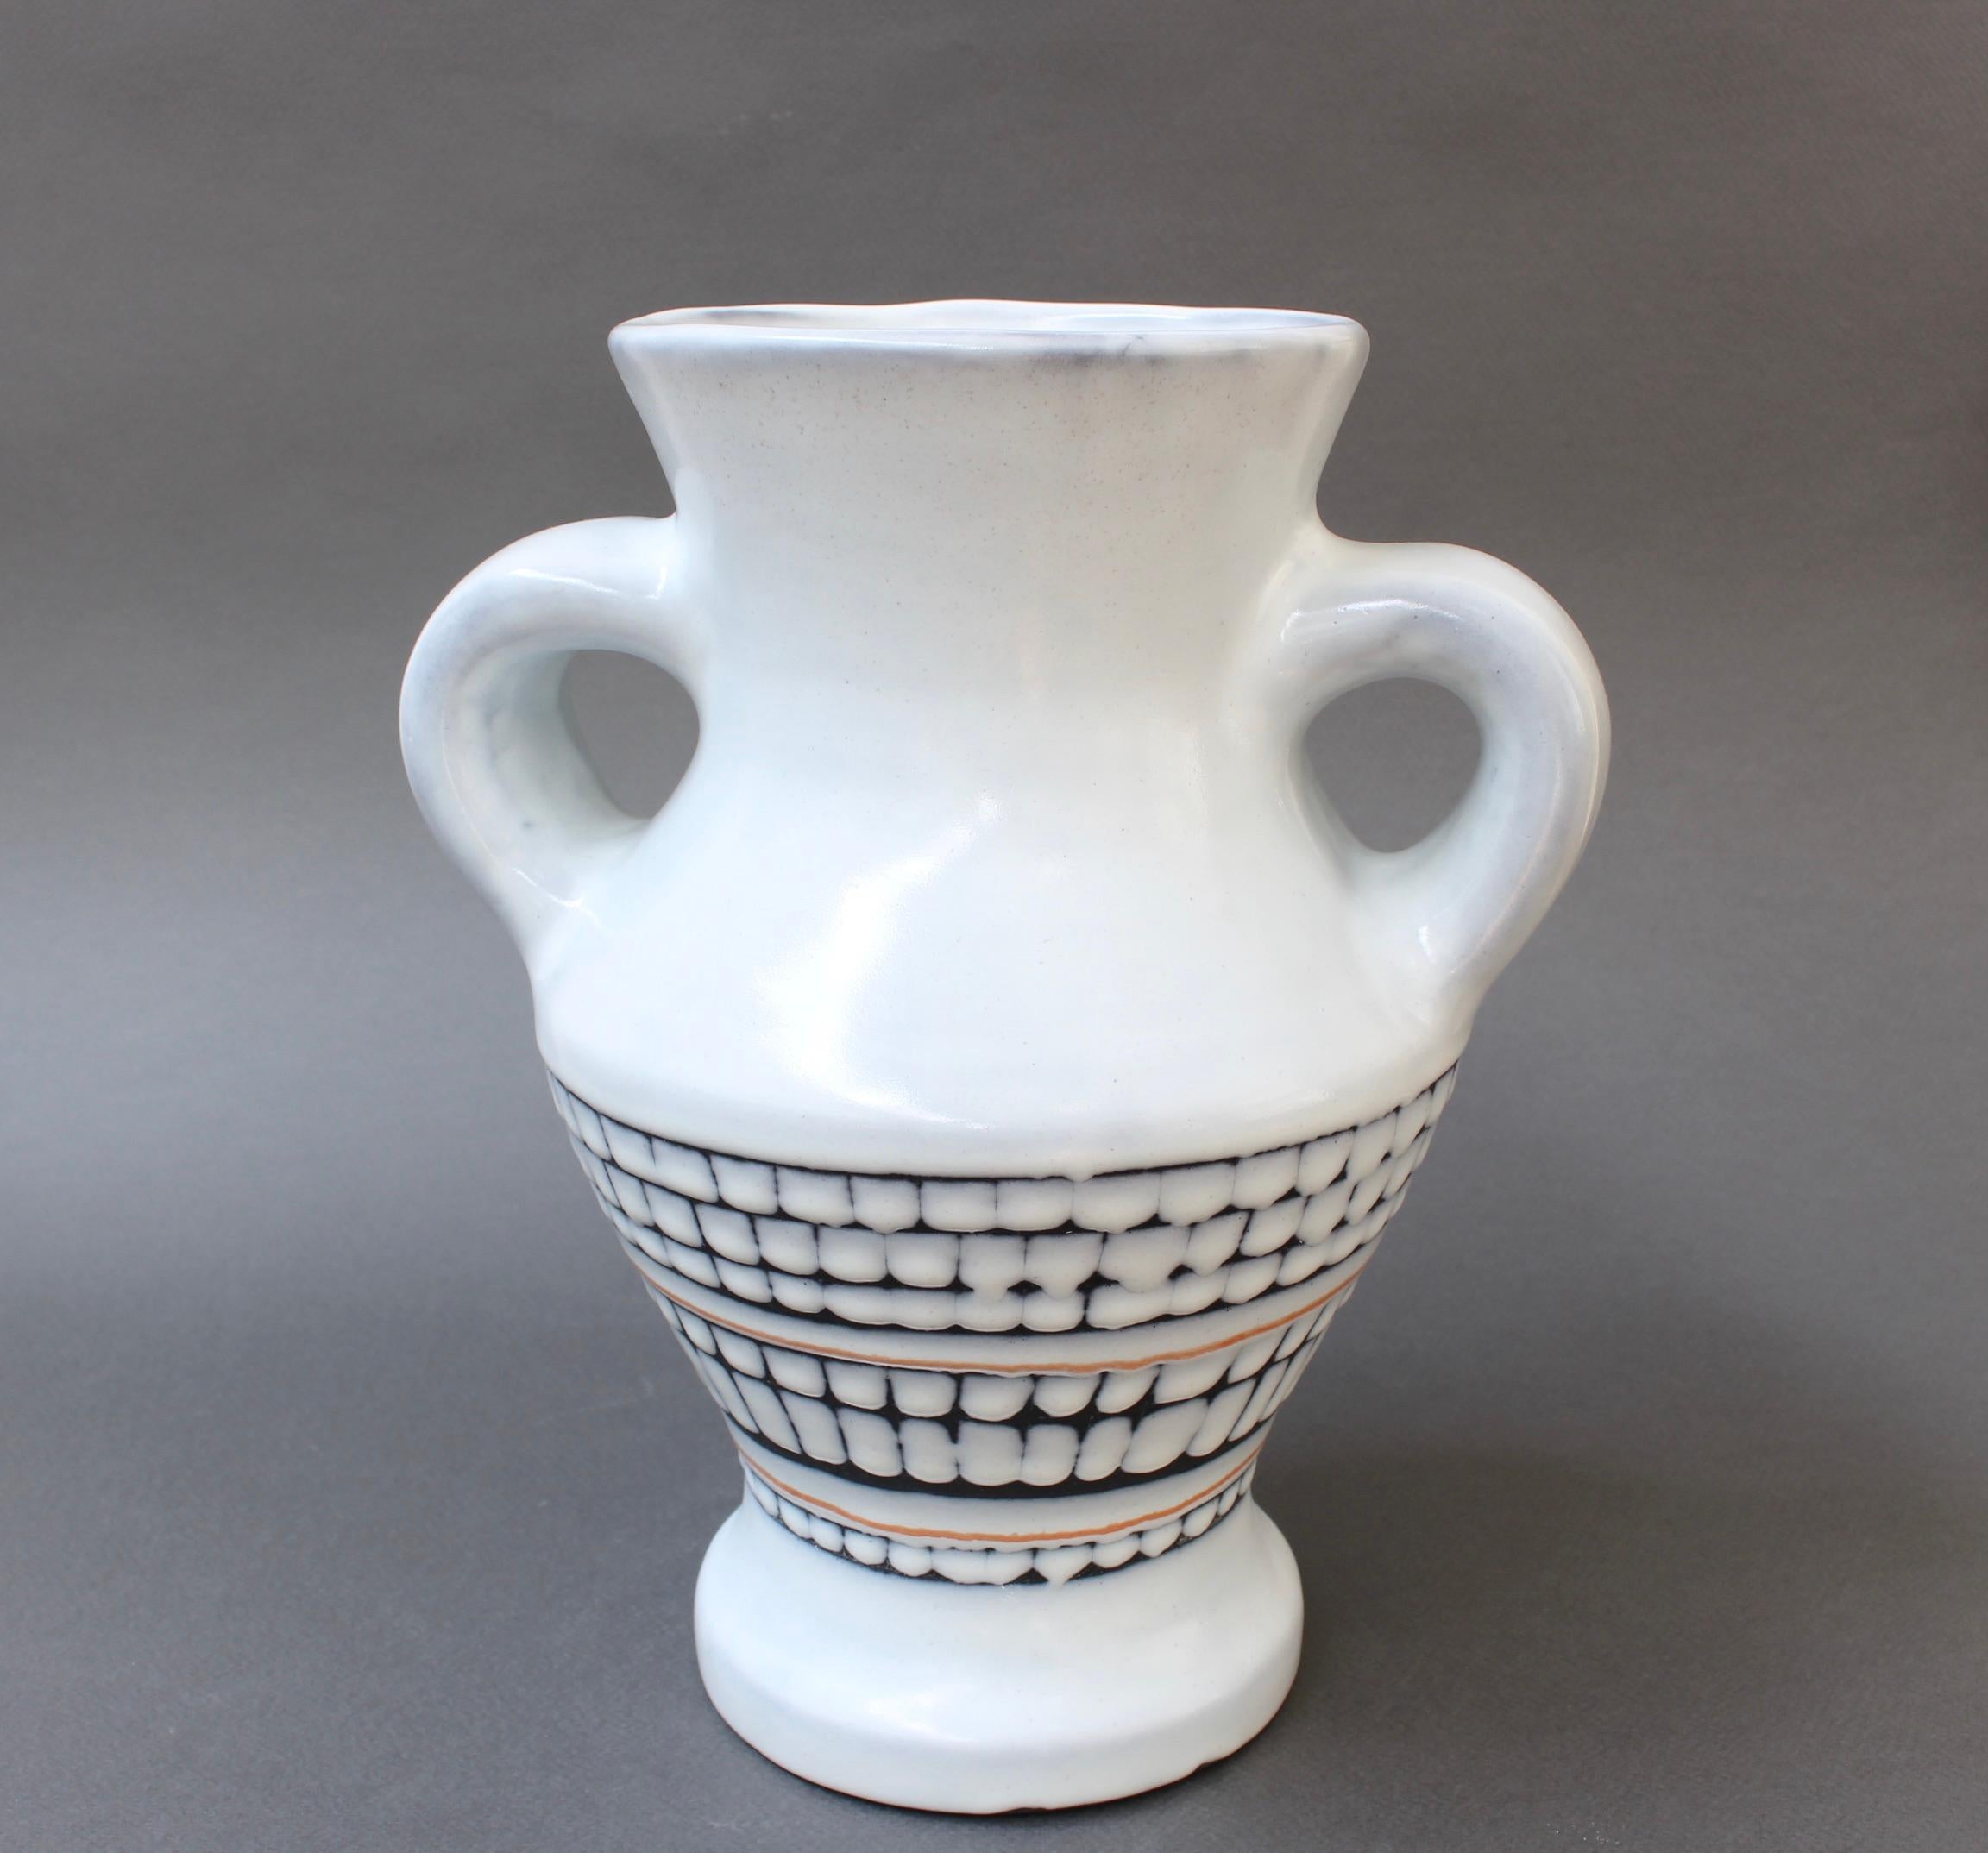 A vintage ceramic vase with classic-style handles by master ceramicist, Roger Capron (circa 1950s). In very good overall condition, the chalk-white background is decorated with a tile pattern from the mid-section down. A piece of this size and